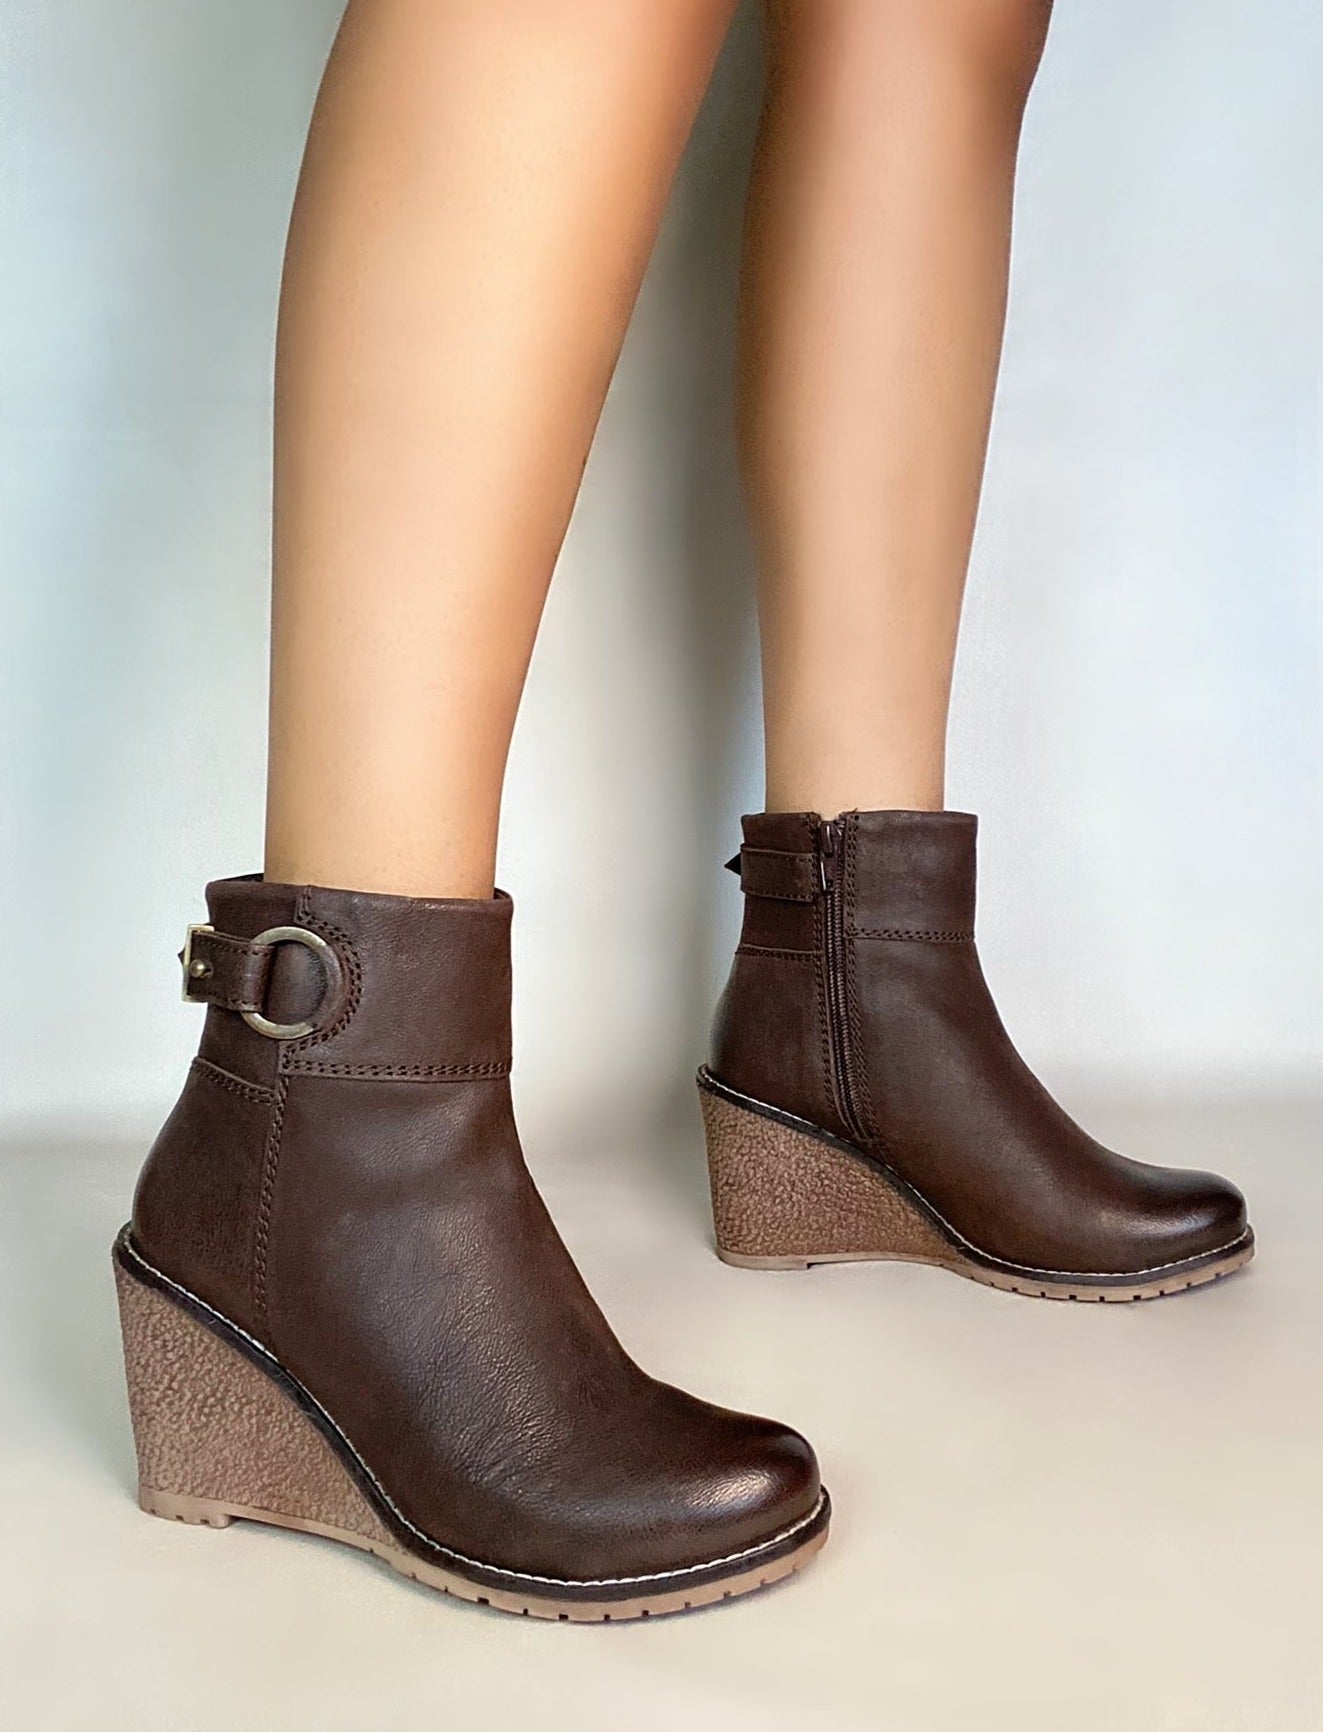 ankle wedge boot oobash